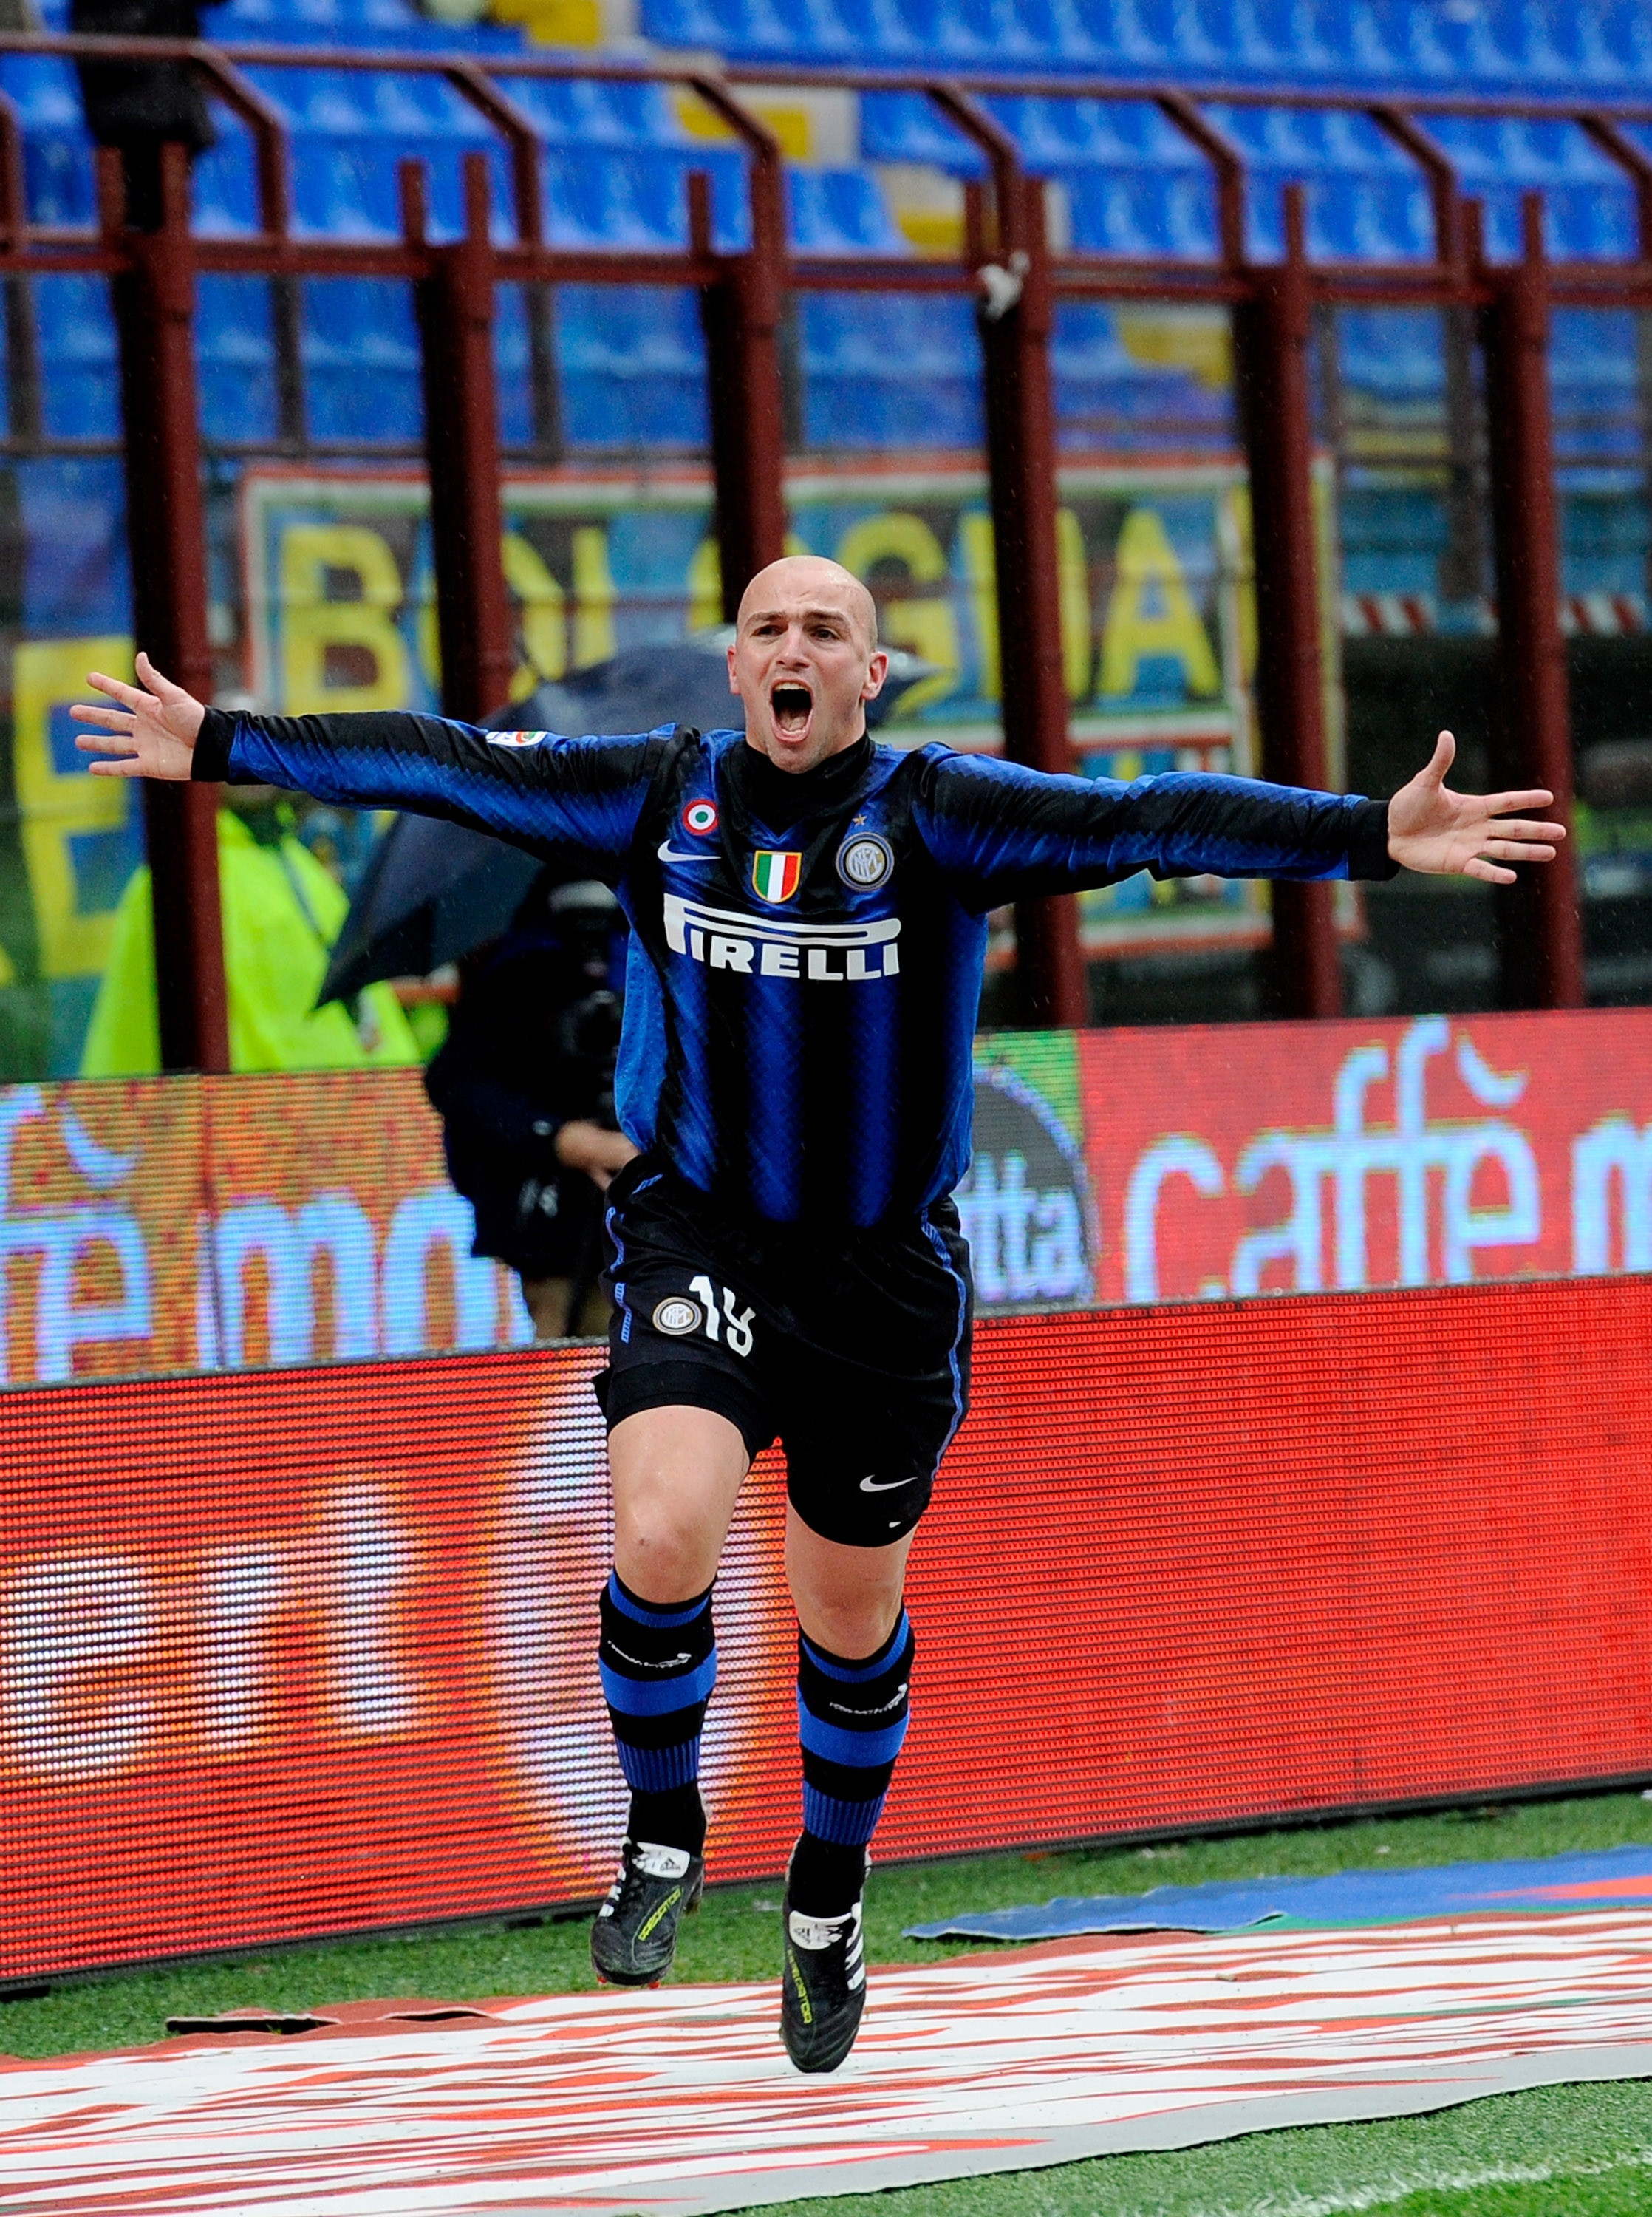 MILAN, ITALY - NOVEMBER 28:  Esteban Cambiasso of FC Internazionale Milano celebrates after scoring the first goal during the Serie A match between Inter and Parma at Stadio Giuseppe Meazza on November 28, 2010 in Milan, Italy.  (Photo by Claudio Villa/Ge